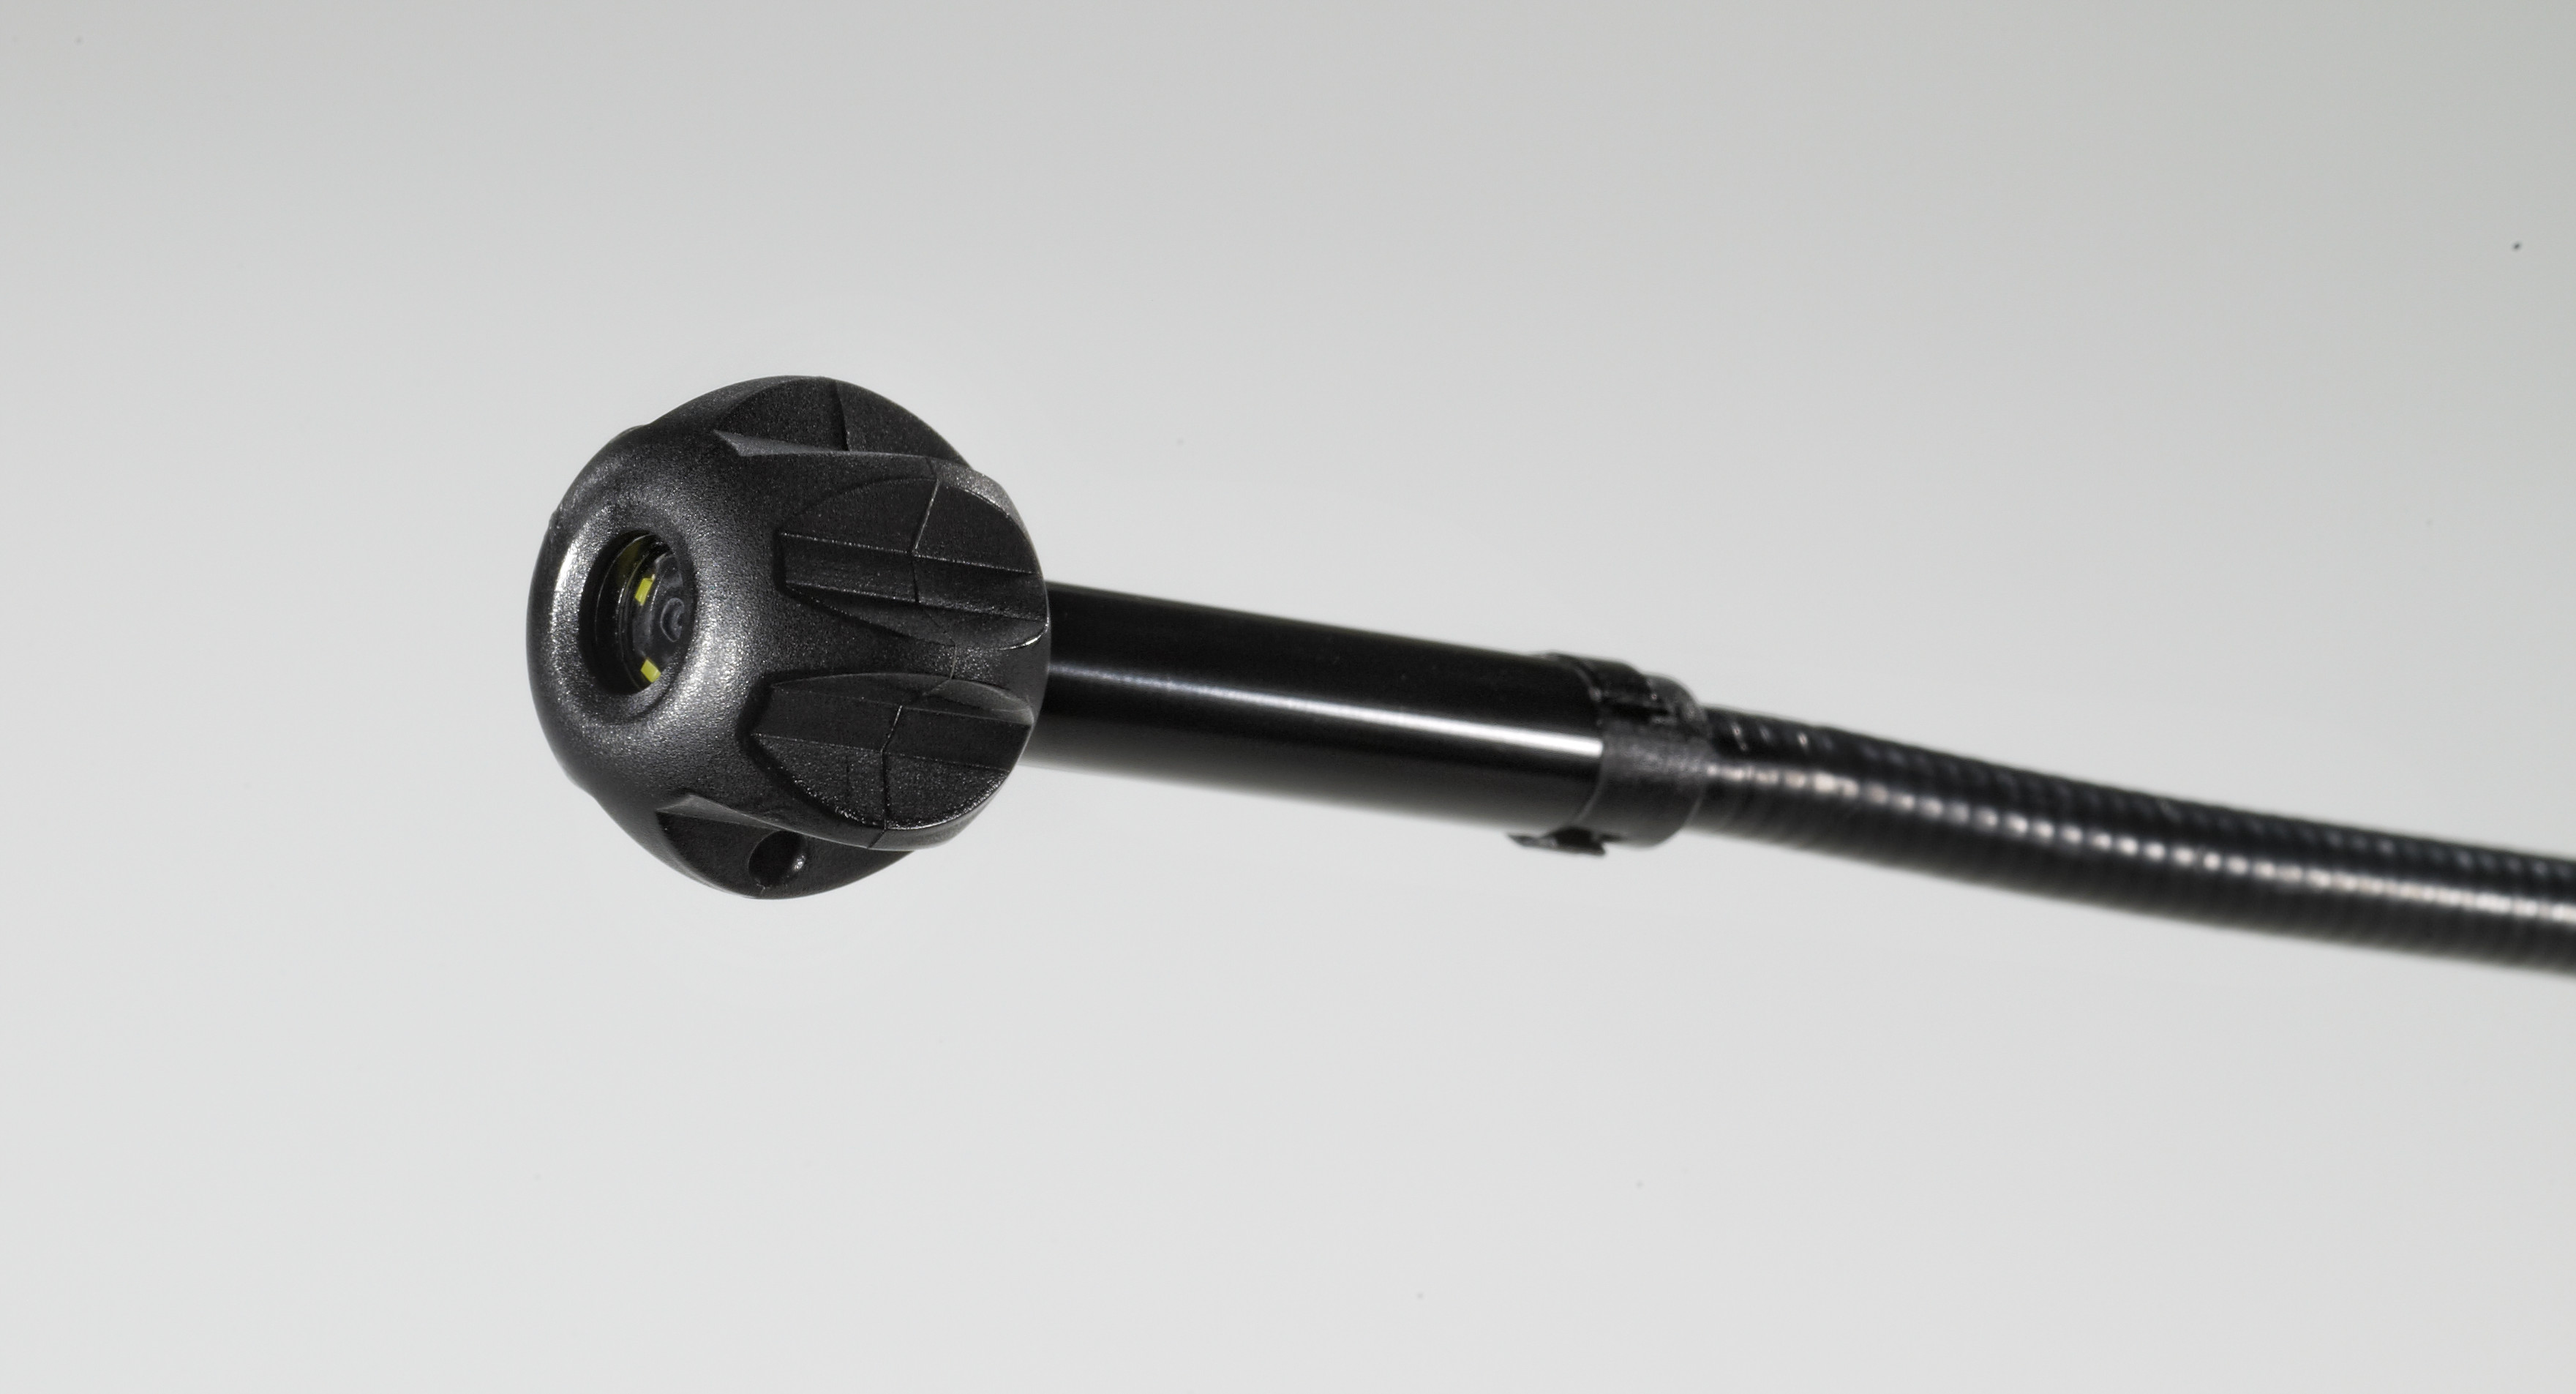 48-53-0113 045242271009 The M-Spector 360™ pipe guide attachment (48-53-0113) is designed specifically for plumbers frequently inspecting pipes. The 1 in. ball-shaped attachment reduces friction on the camera head allowing it to maneuver easily through PVC, copper and cast iron pipe. Its design also elevates the camera out of resting water and reduces potential for build-up. This attachment fits both M-Spector consoles and is included in the (2314-20) M-Spector 360™ rotating inspection camera kit.